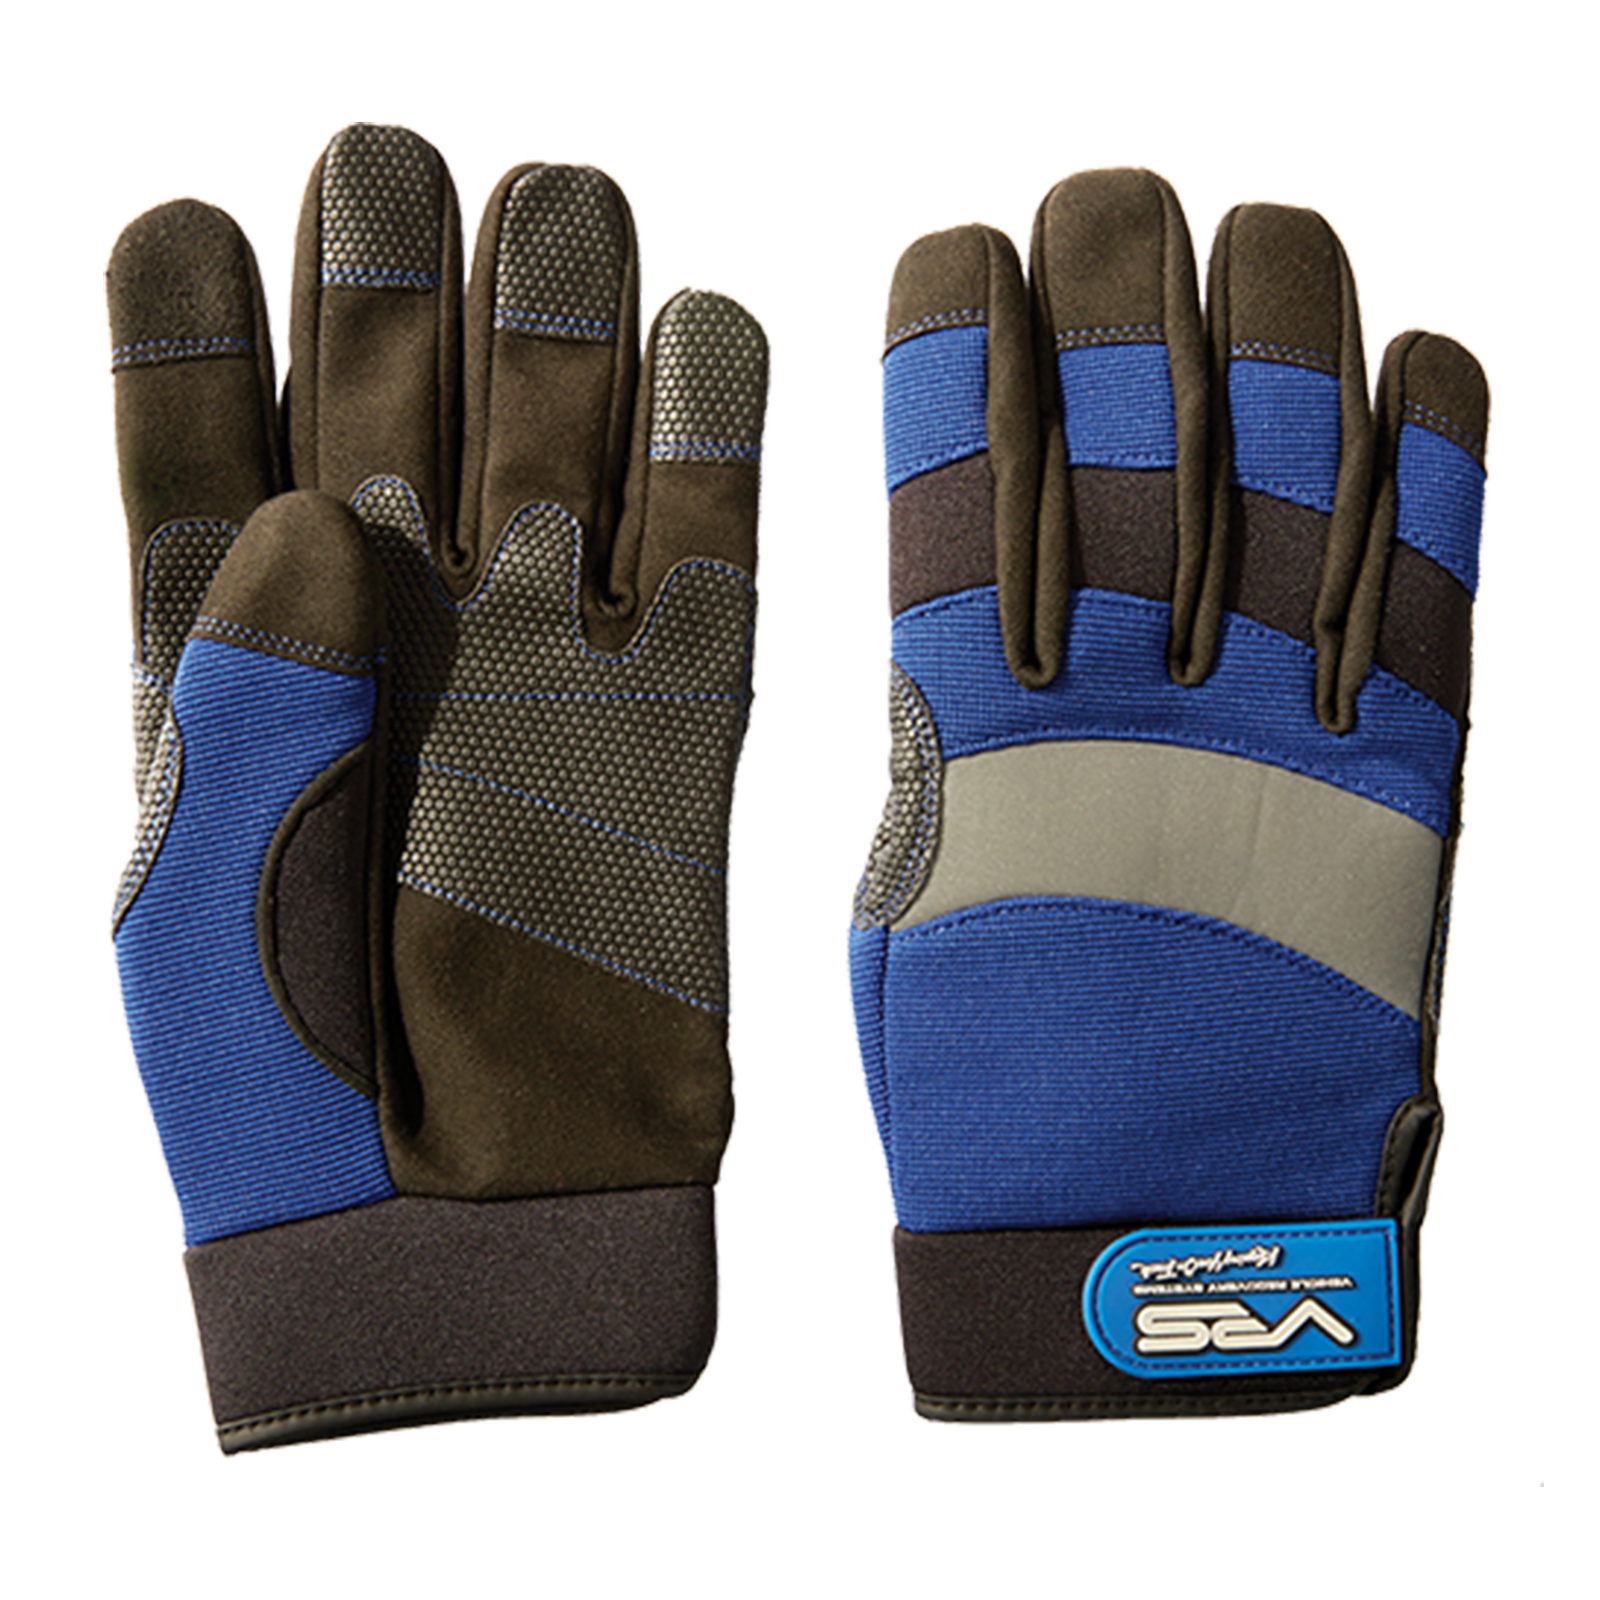 VRS  protective gloves for vehicle recovery